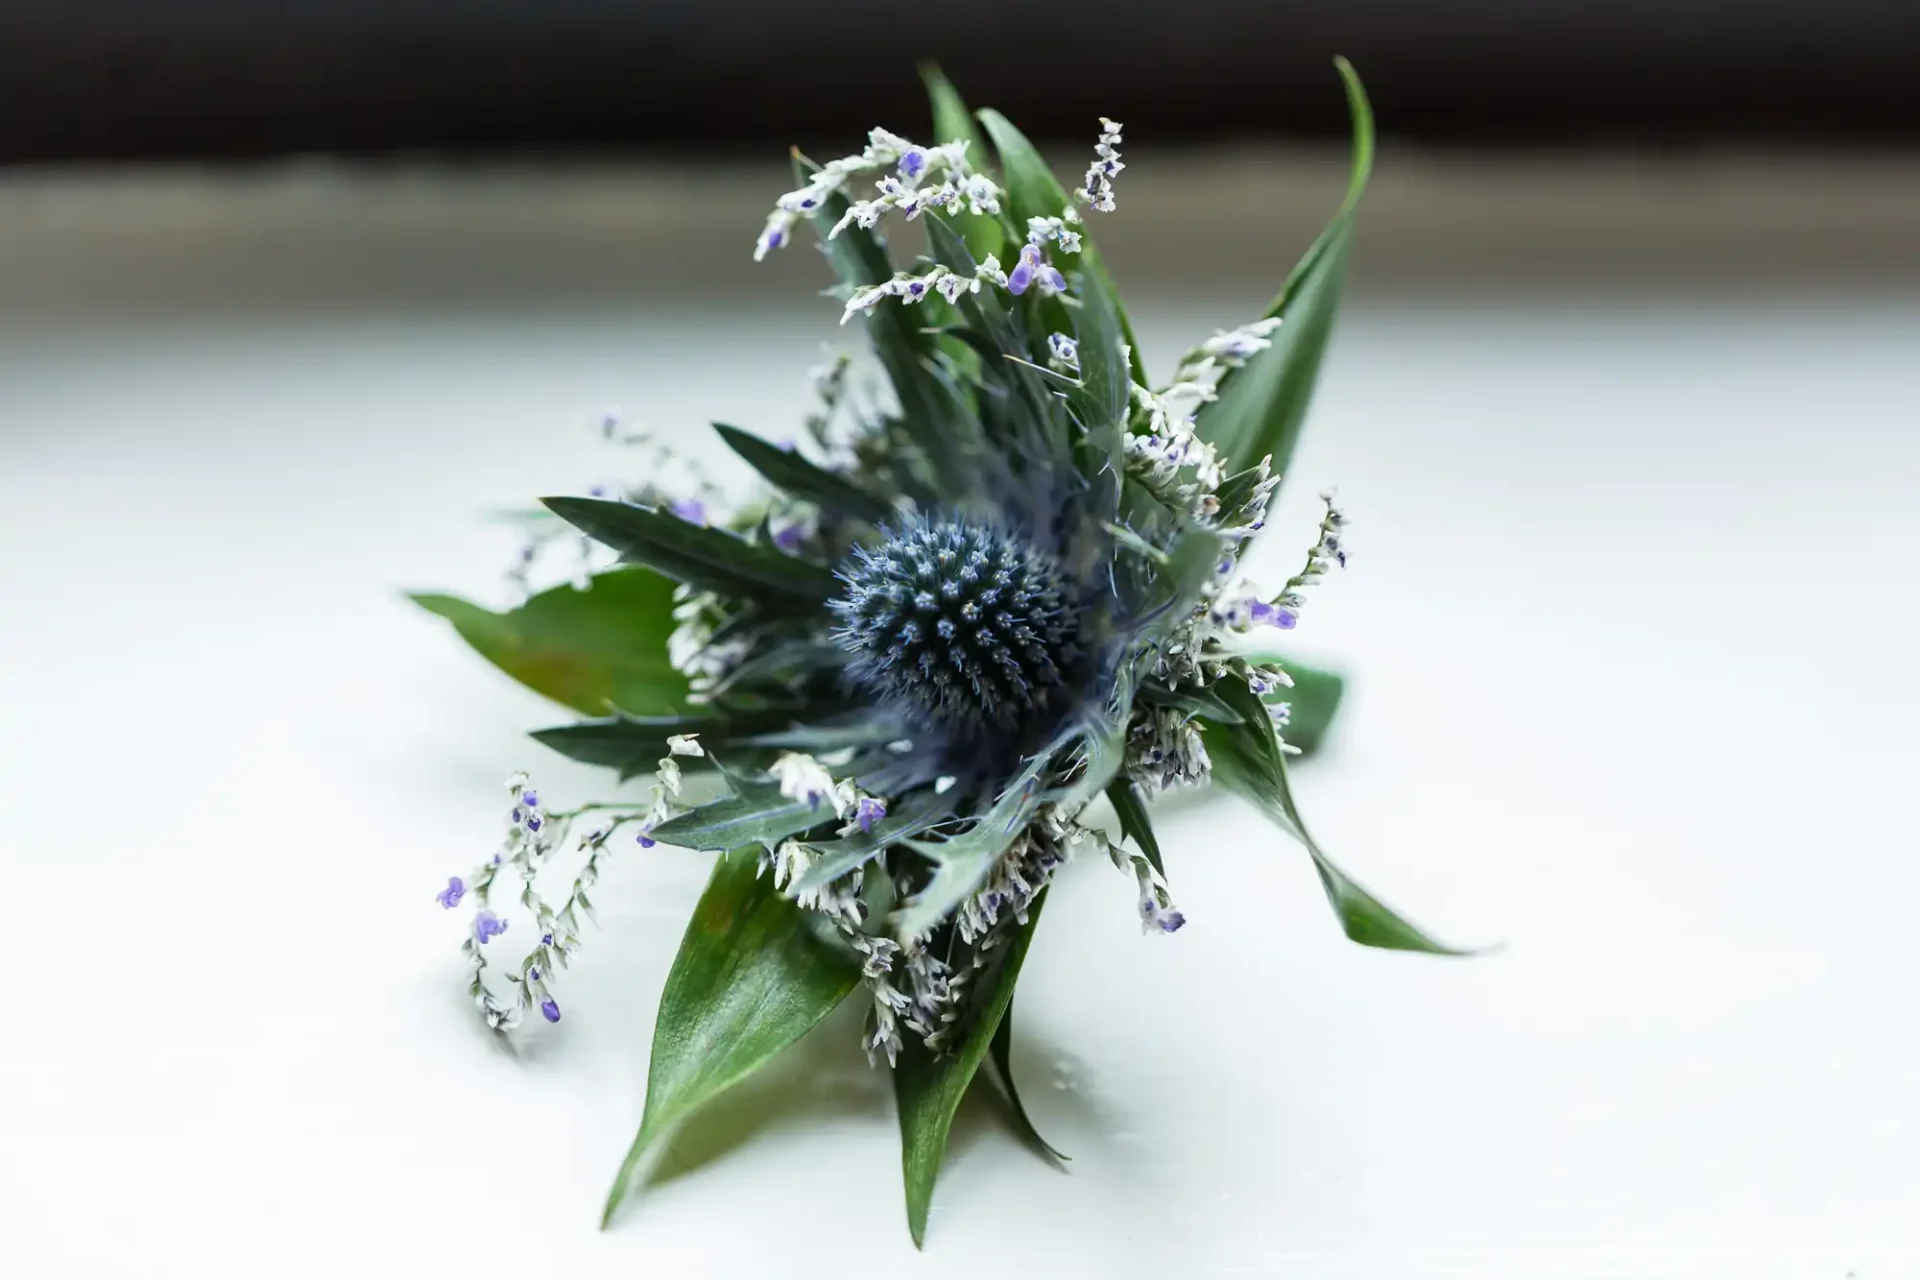 Close-up of a sea holly flower with delicate purple blooms and spiky green leaves against a soft white background.